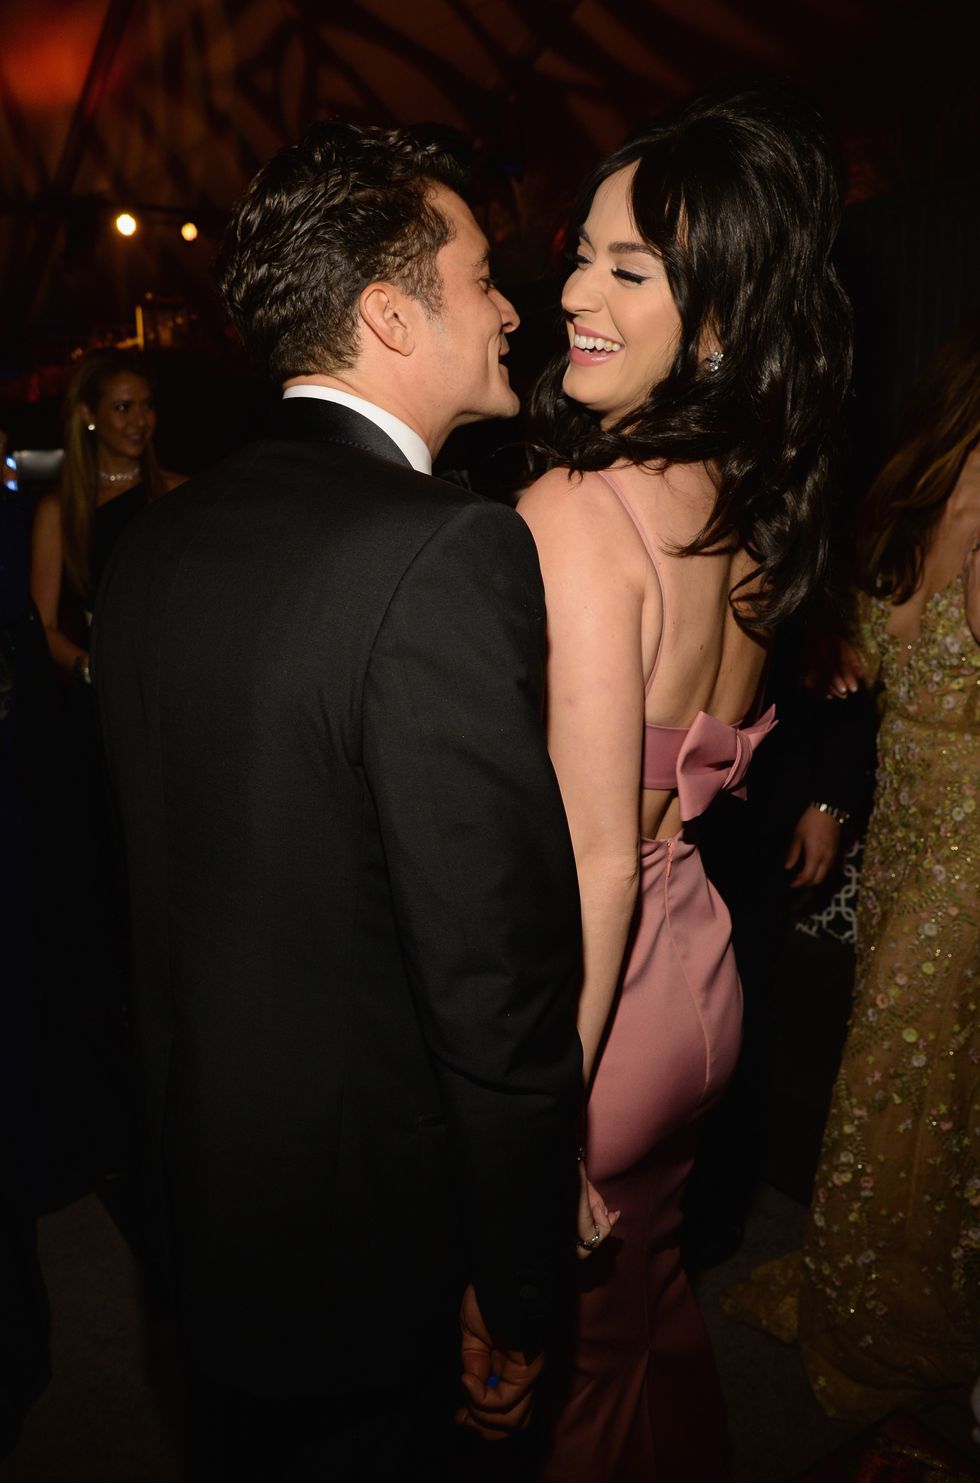 beverly hills, ca january 10 orlando bloom and katy perry attend the weinstein company and netflix golden globe party, presented with deleon tequila, laura mercier, lindt chocolate, marie claire and hearts on fire at the beverly hilton hotel on january 10, 2016 in beverly hills, california photo by kevin mazurgetty images for the weinstein company